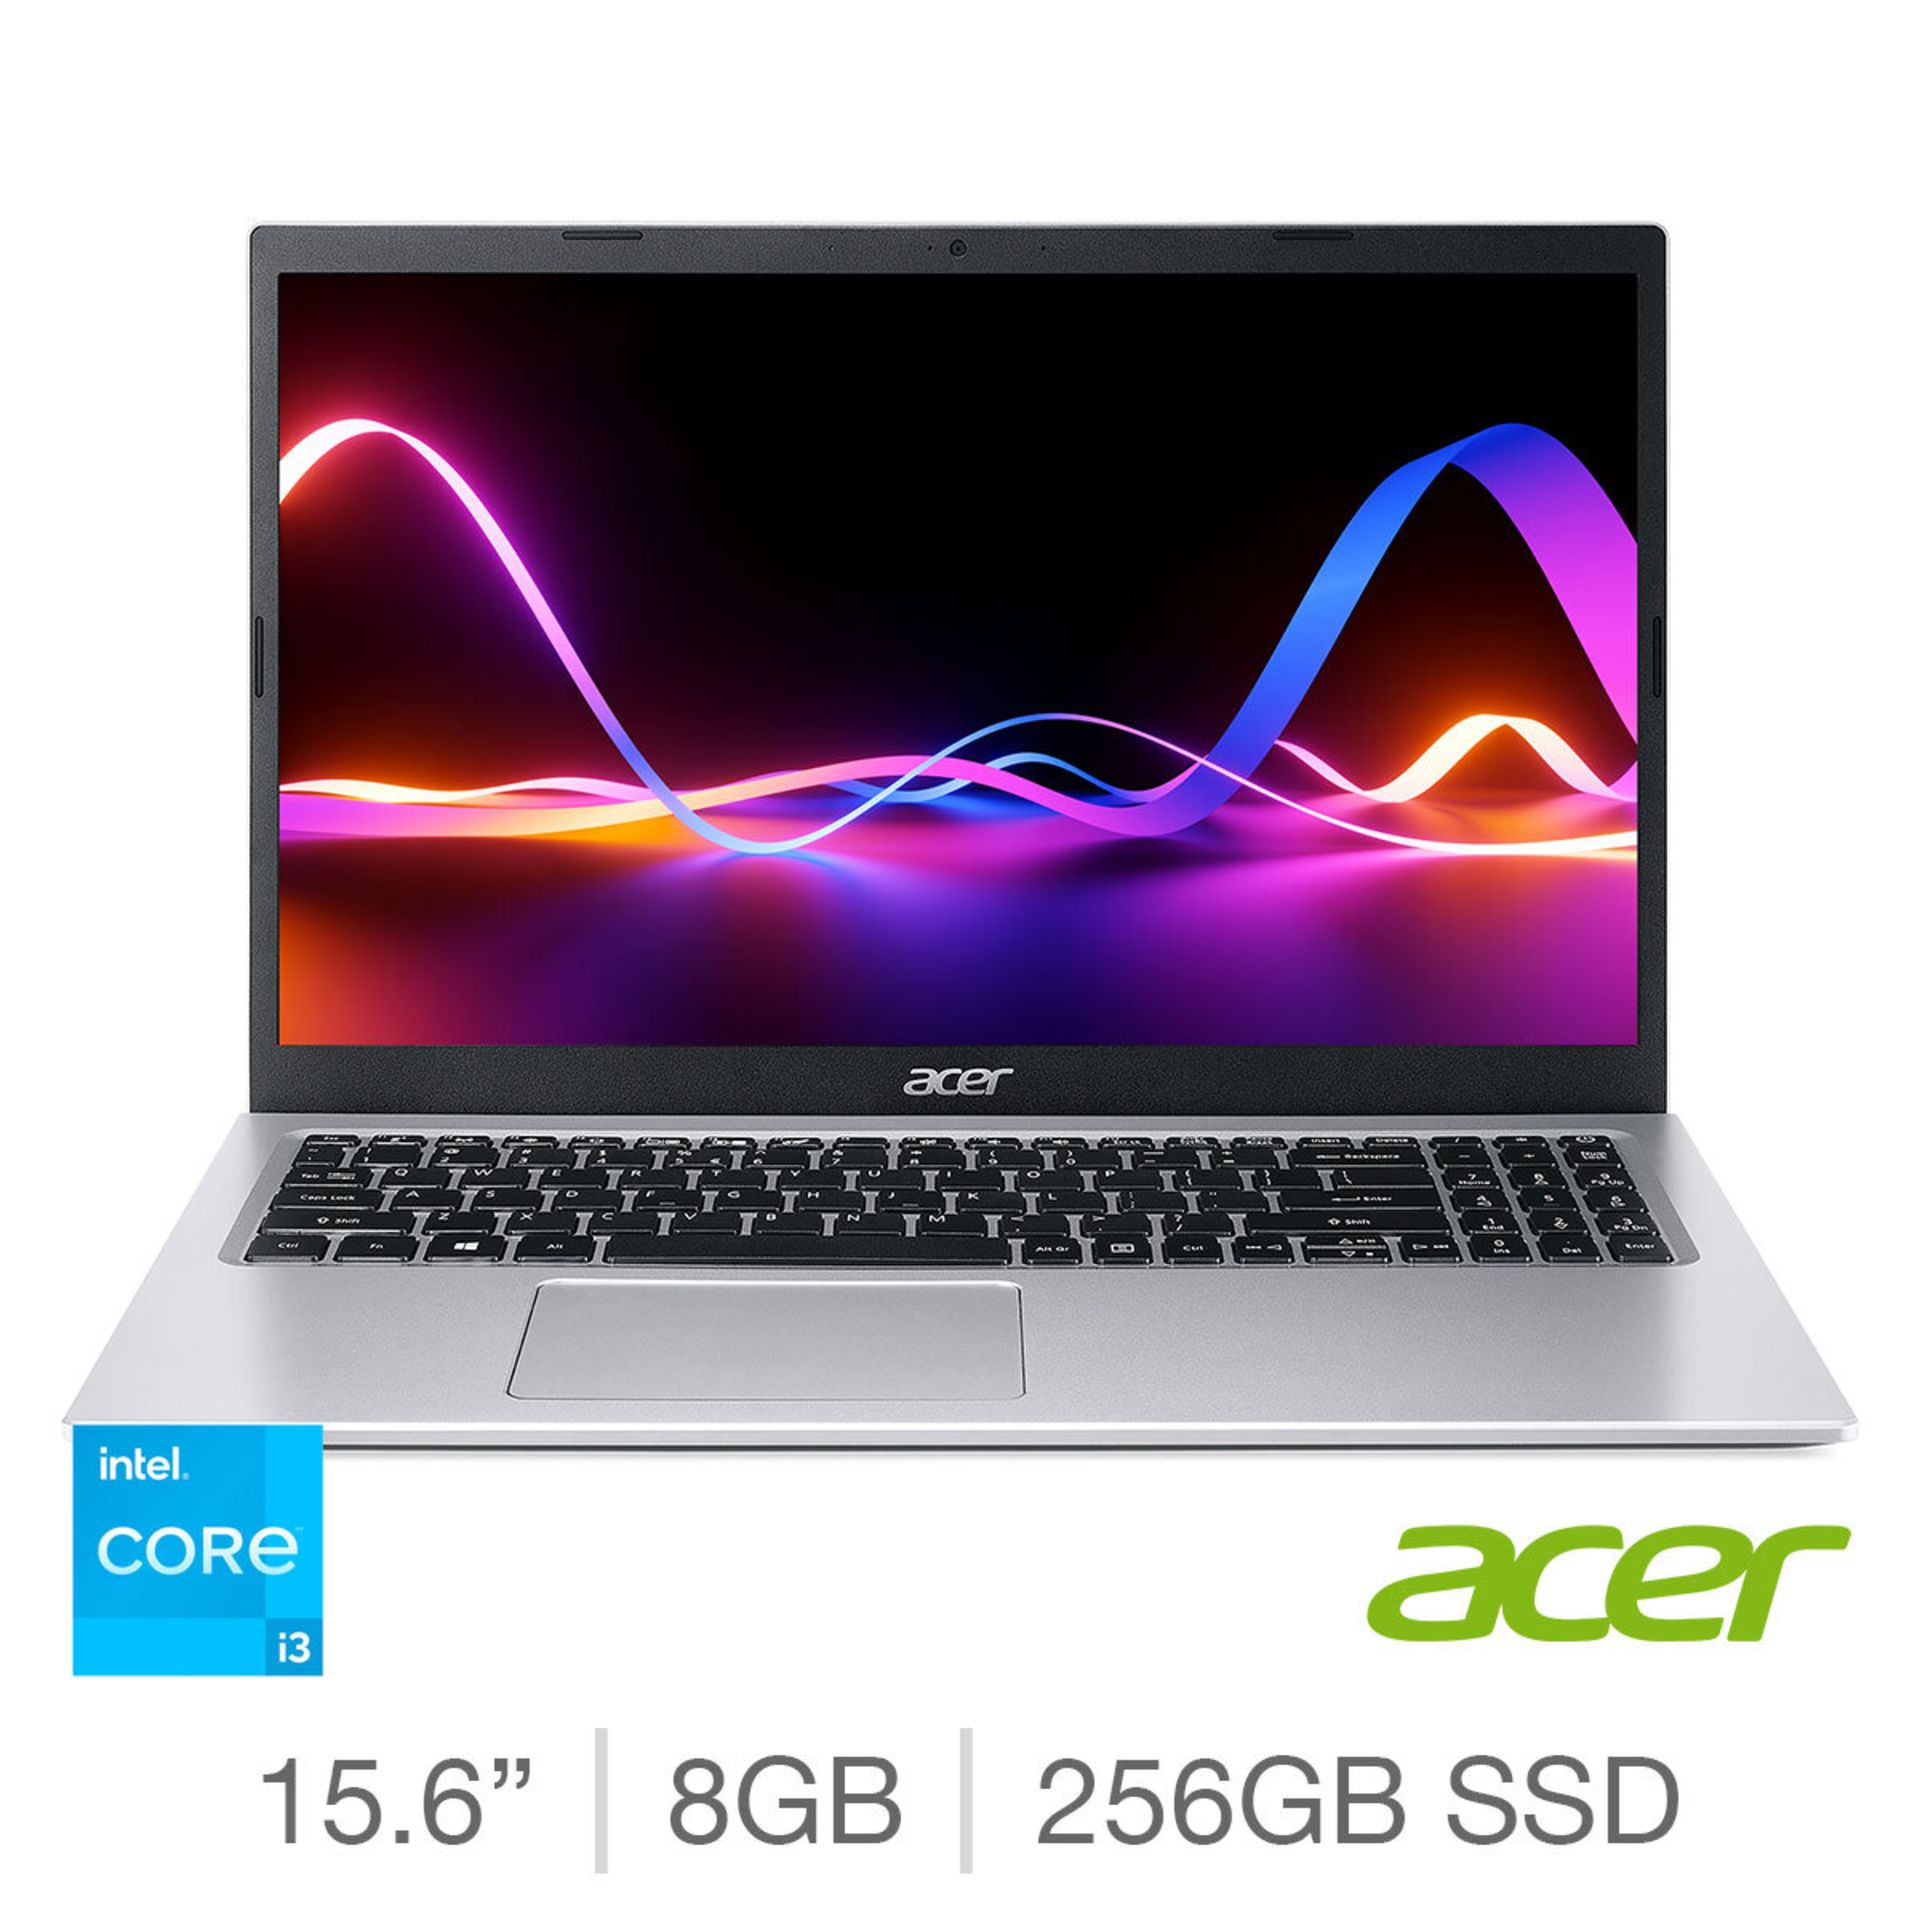 1 BOXED ACER ASPIRE 3, INTEL CORE I3, 8GB RAM, 256GB SSD, 15.6 INCH LAPTOP, NX.AT0EK.009 WITH